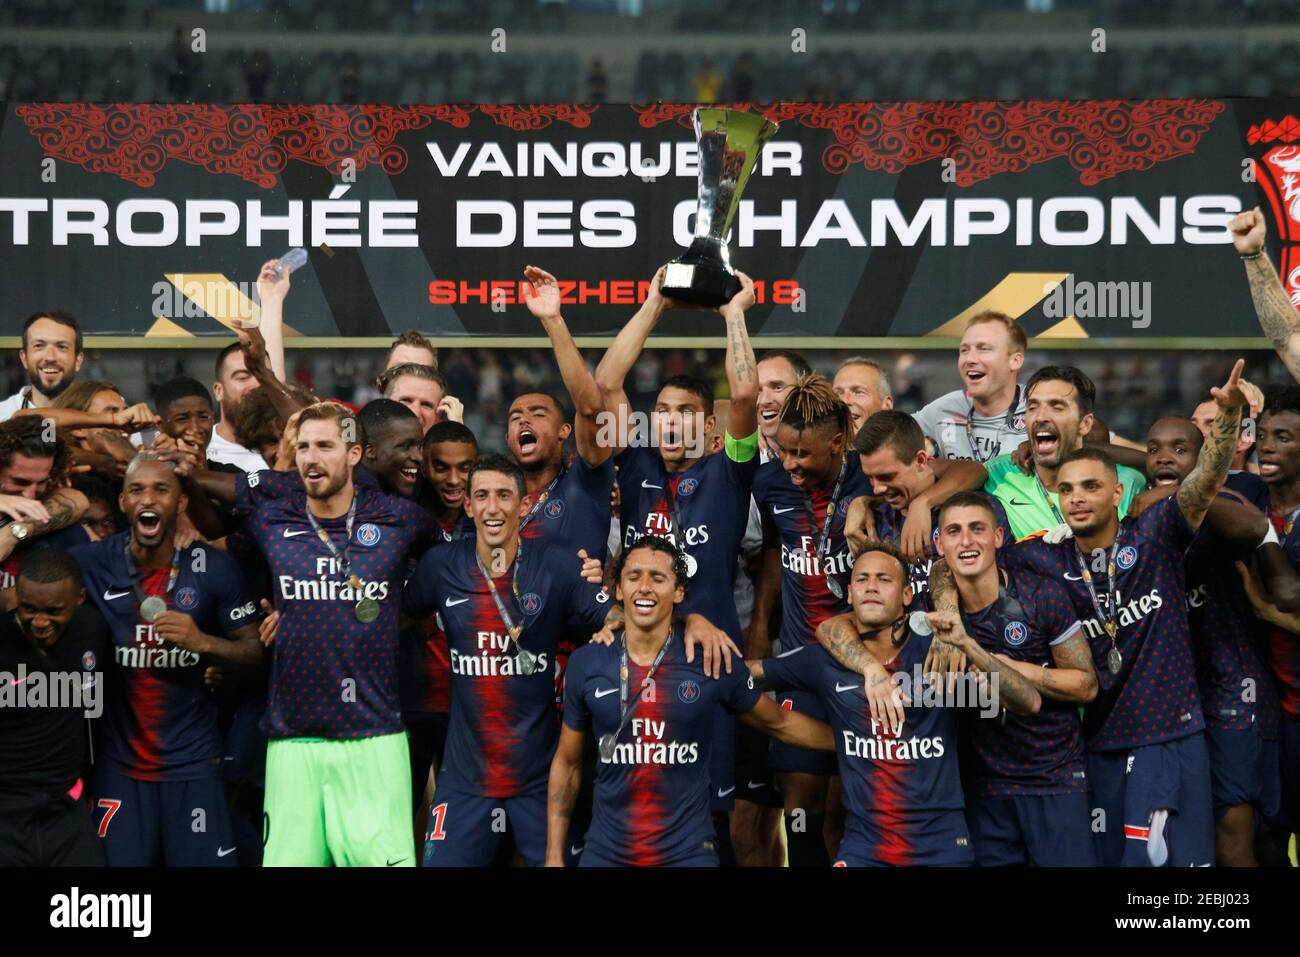 Soccer Football - French Super Cup Trophee des Champions - Paris St Germain v AS Monaco - Shenzhen Universiade Sports Centre, Shenzhen, China - August 4, 2018   Paris St Germain's Thiago Silva celebrates with the trophy and team mates after winning the French Super Cup   REUTERS/Bobby Yip Stock Photo